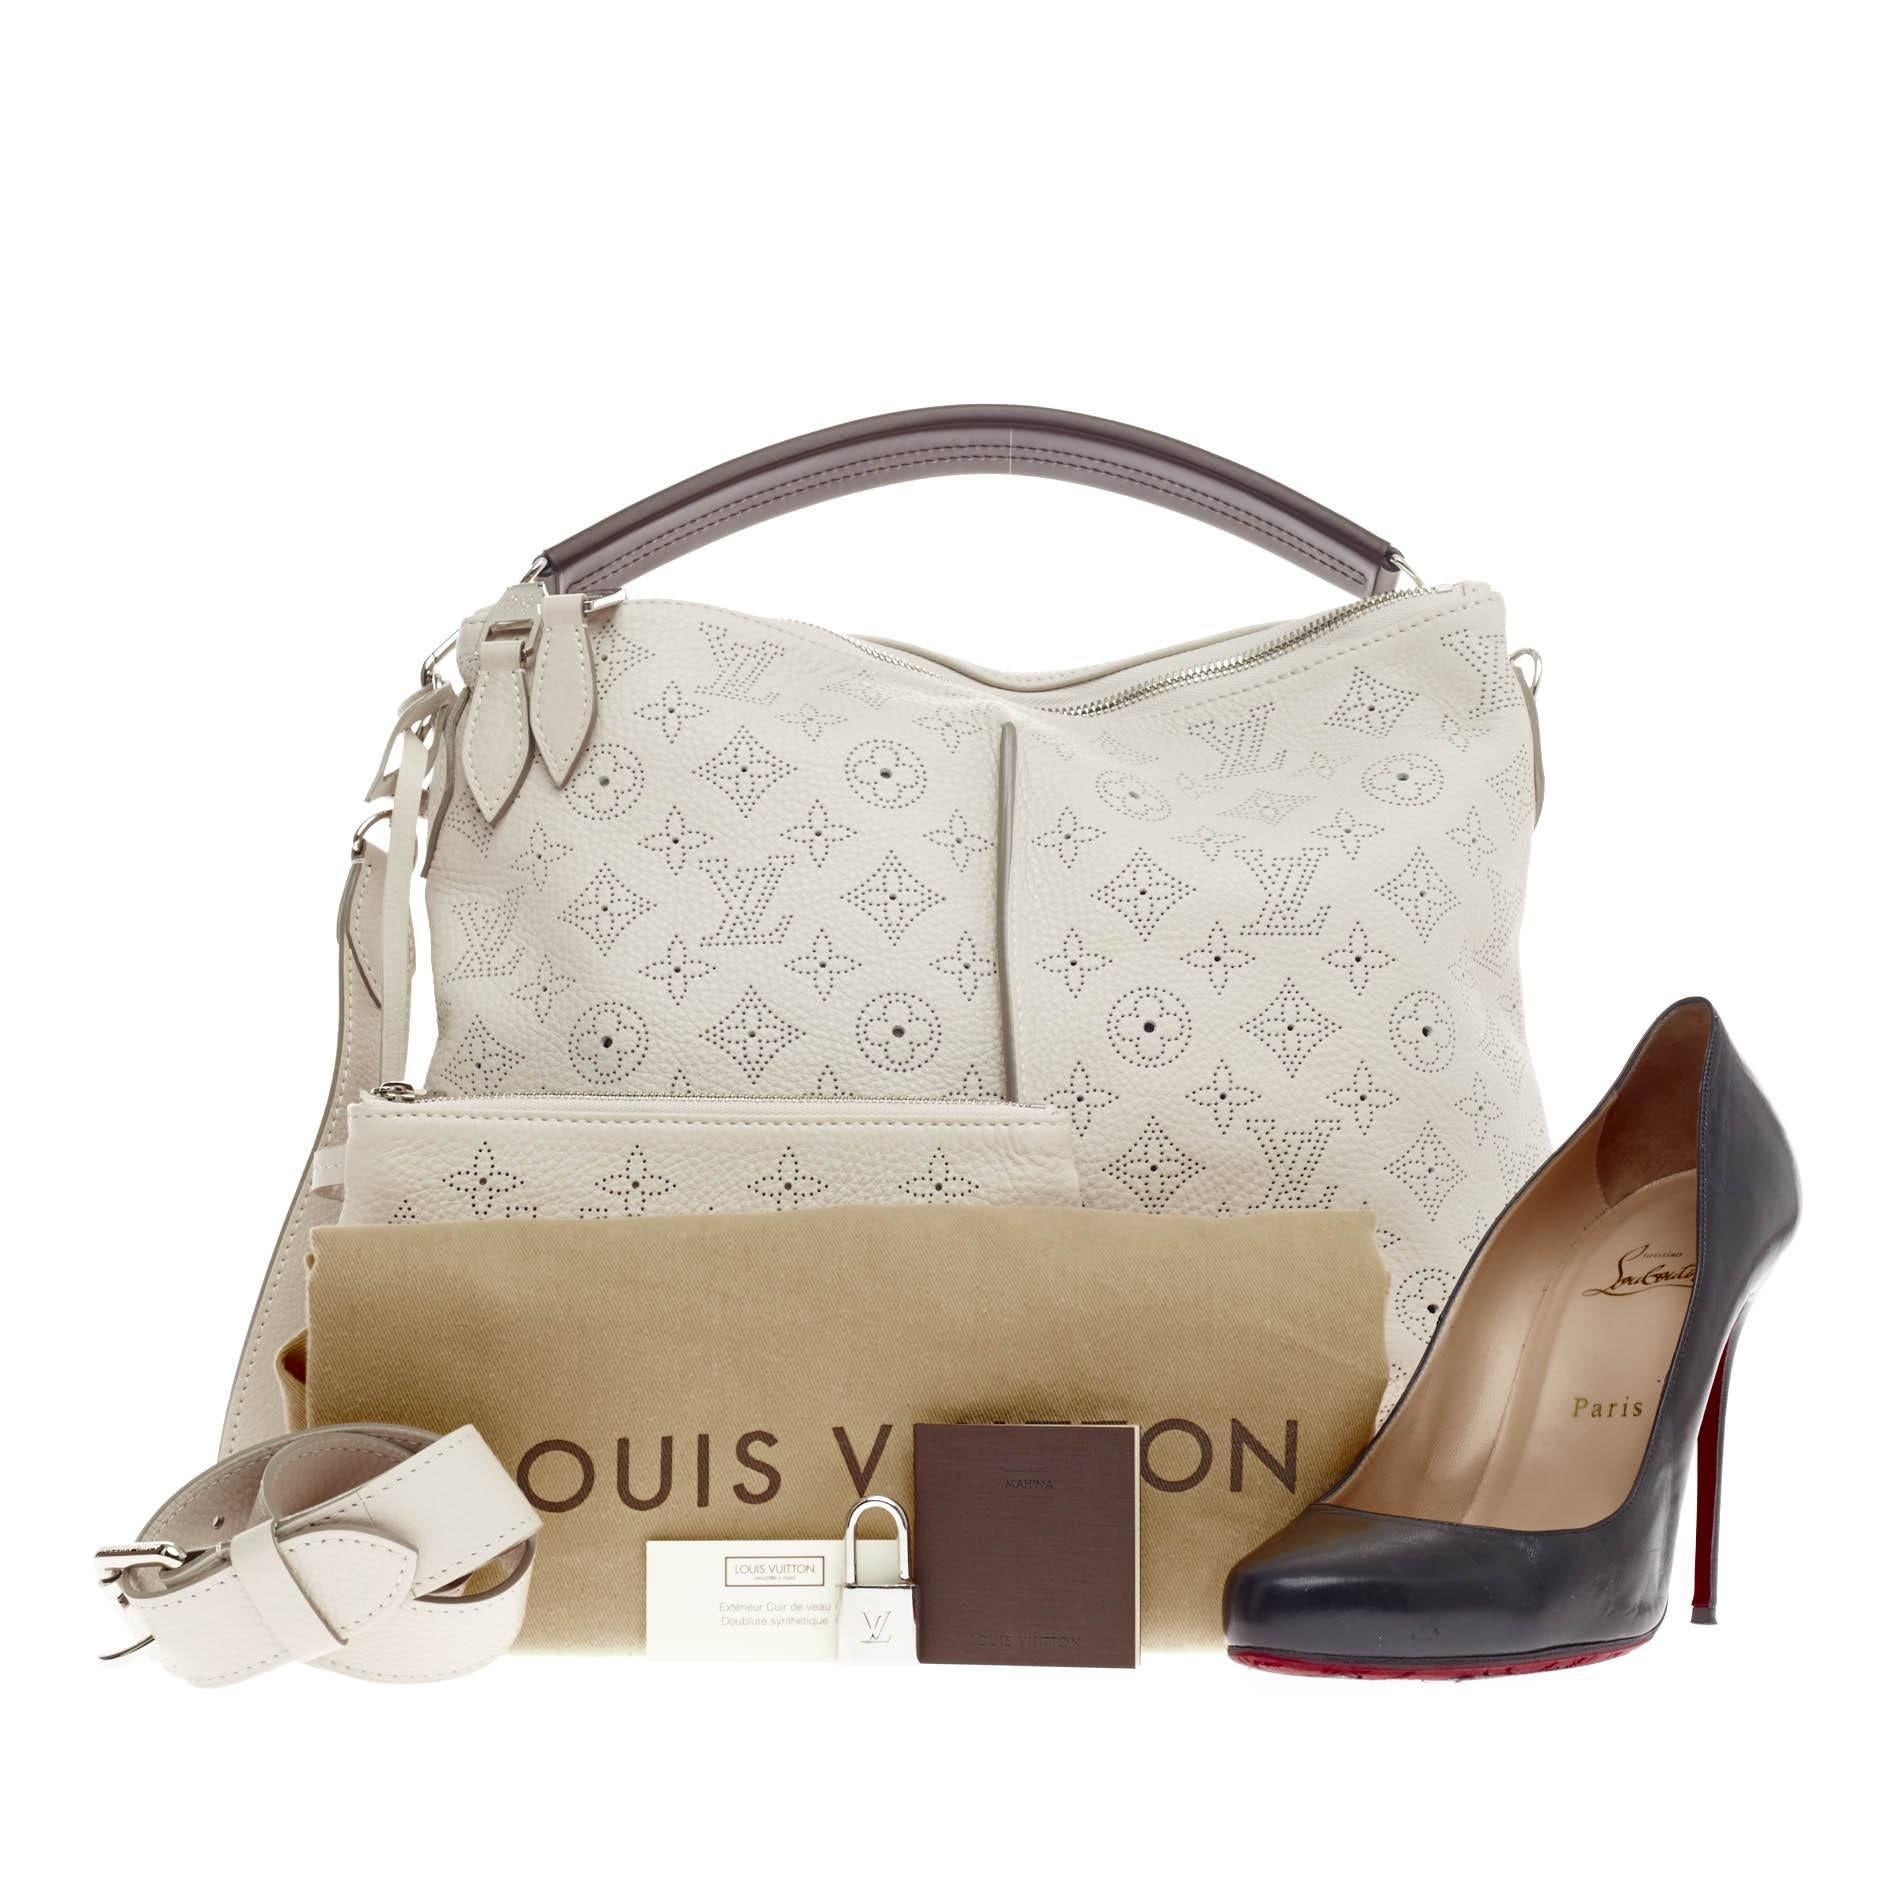 This authentic Louis Vuitton Selene Mahina Perforated Leather PM is an easy, feminine design constructed with intricate perforated LV monogram in beautiful, airy off-white mahina leather. Showcased in the brand's Spring/ Summer 2013 Collection, this